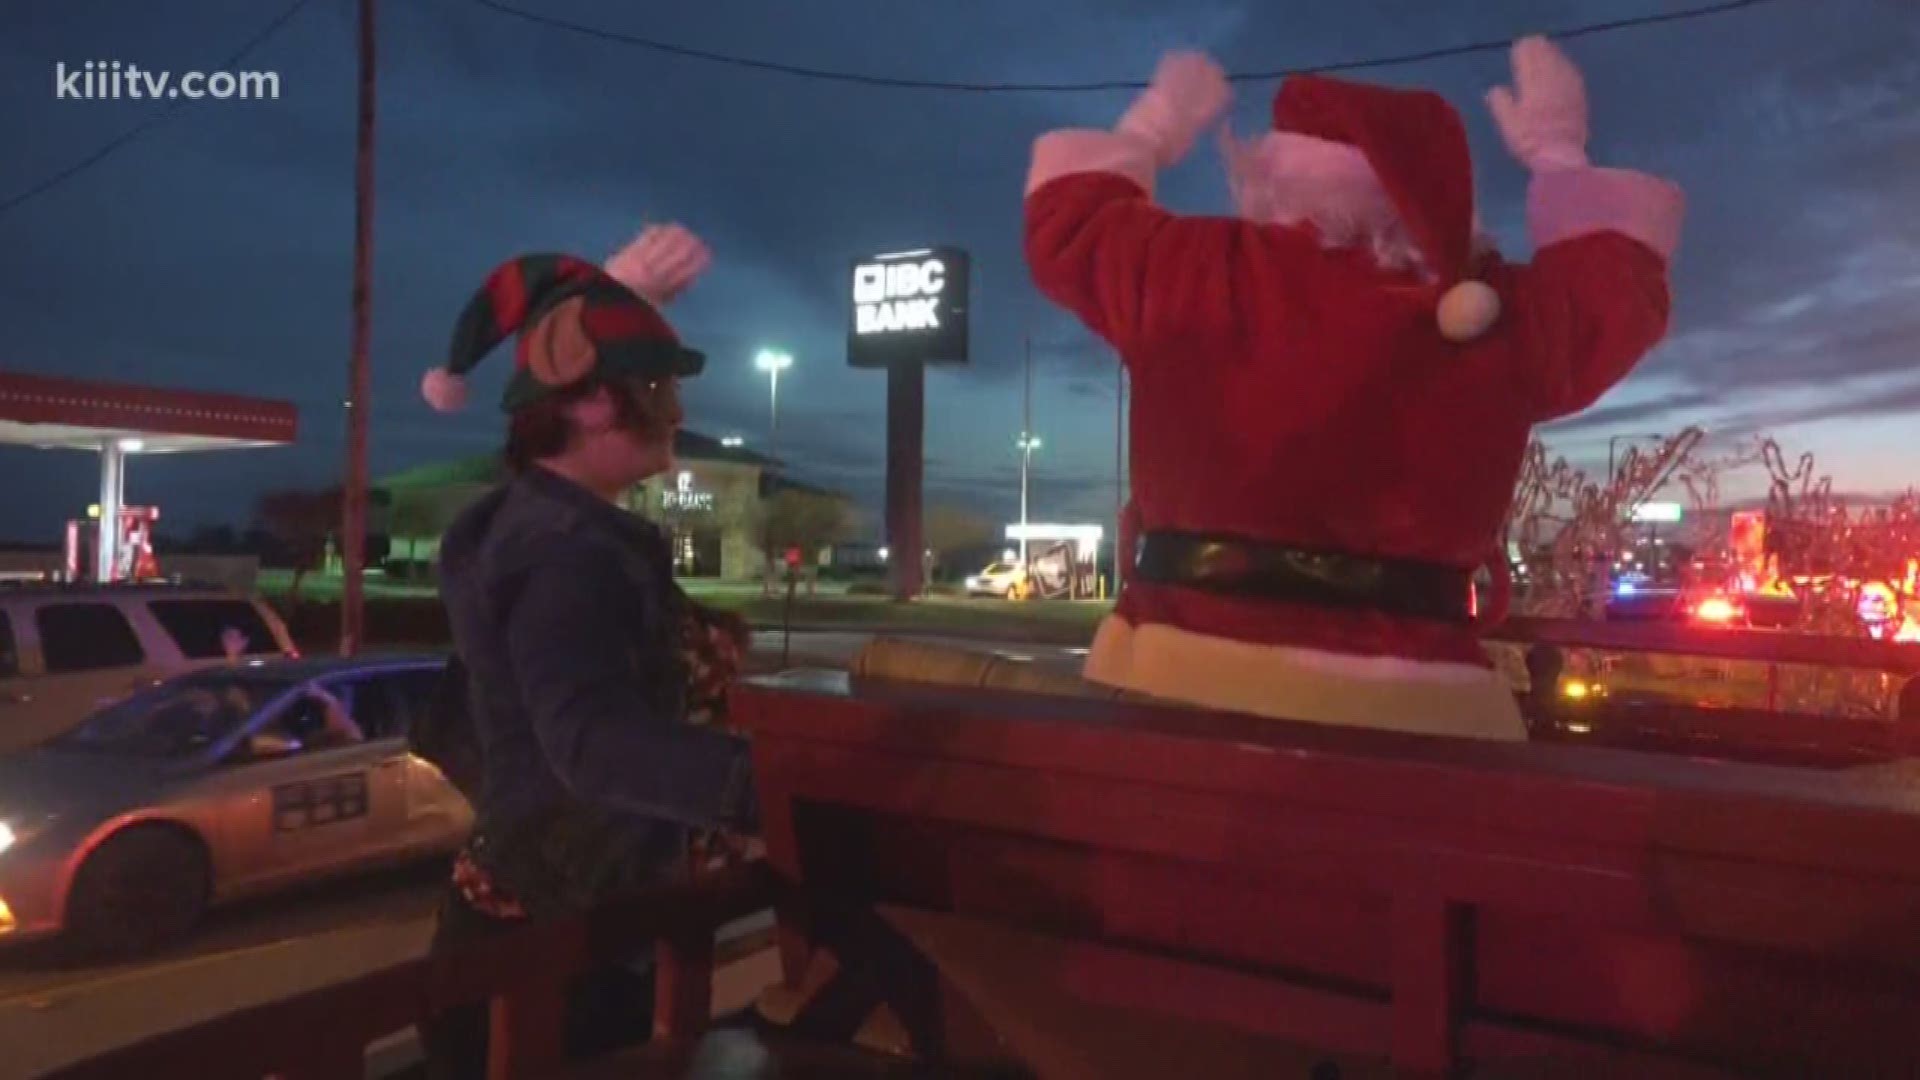 For the fourth night in a row, Nueces County Emergency Services District 2 continued their Christmas parade through Flour Bluff.